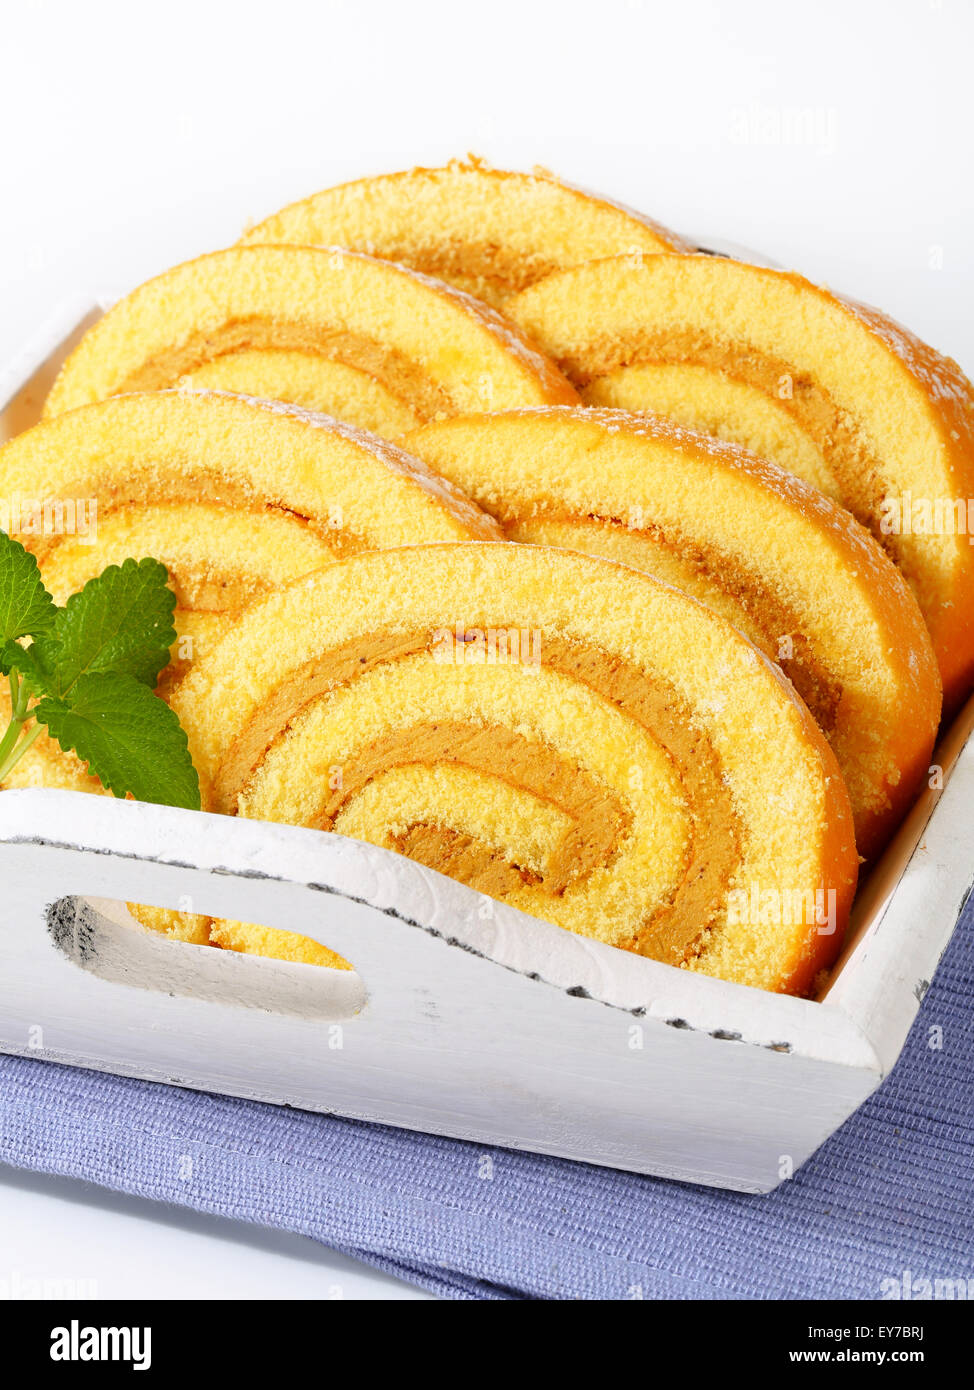 Slices of Swiss roll cake with mocha almond filling Stock Photo